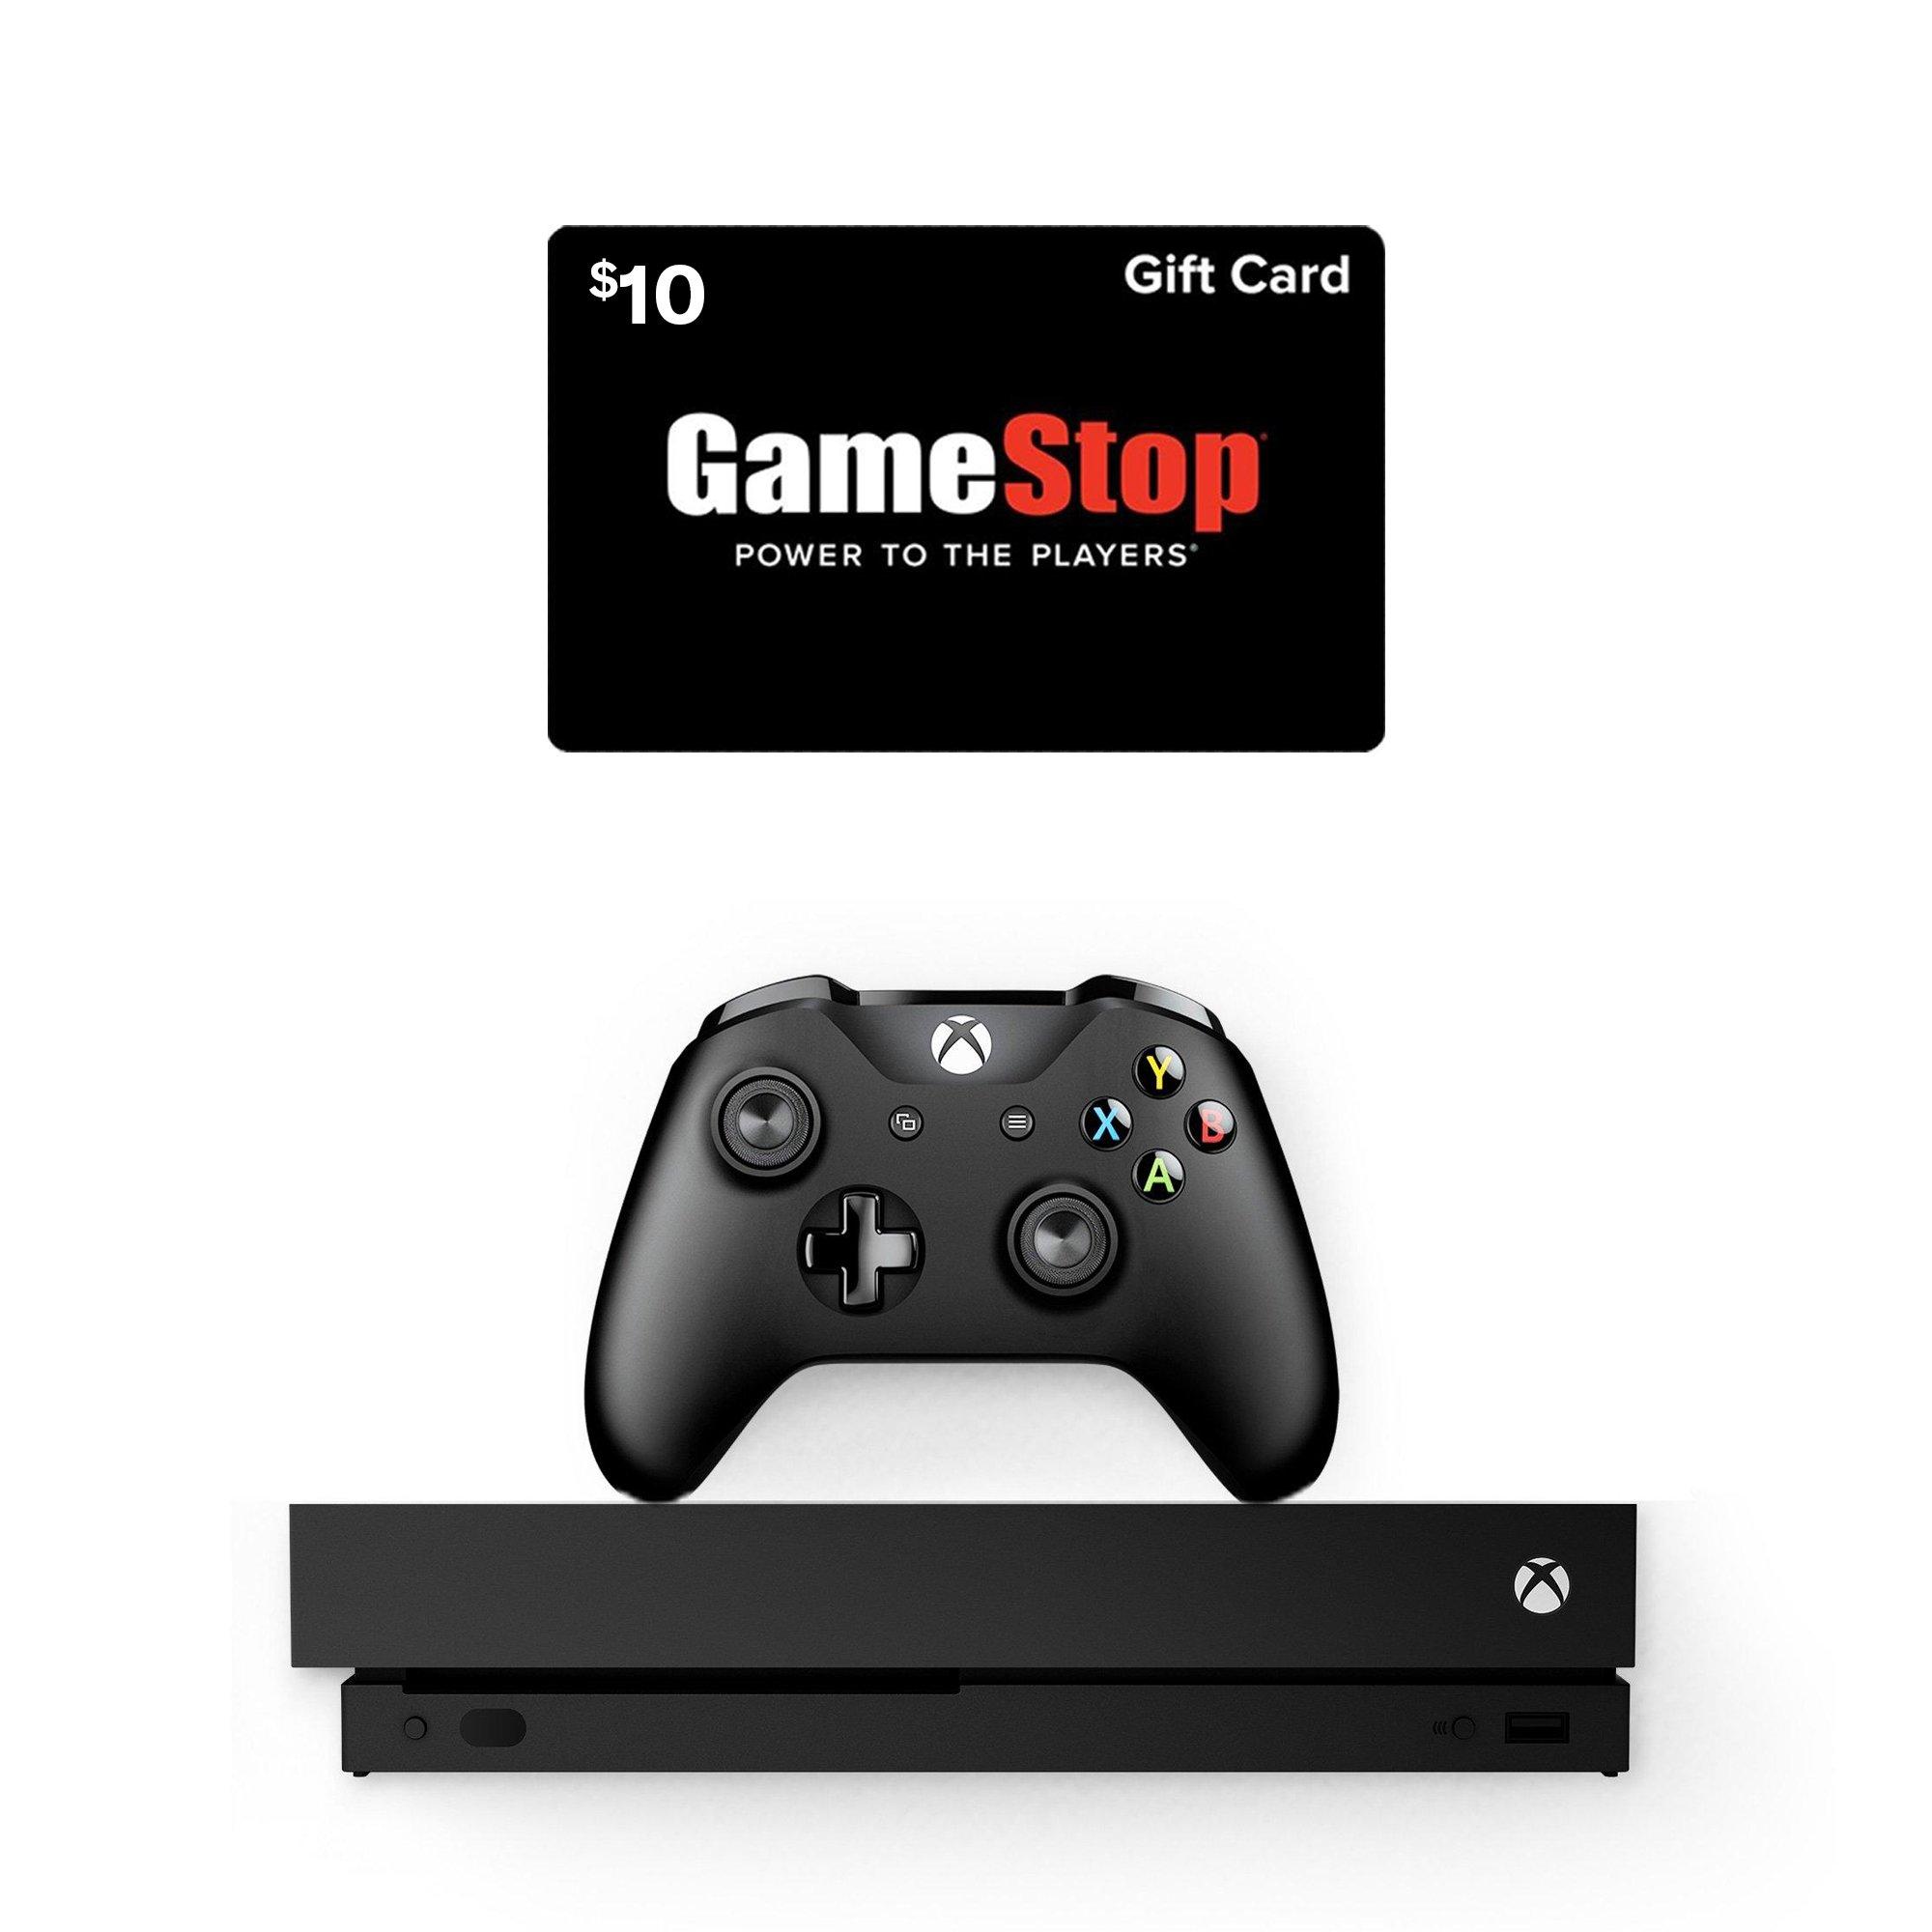 gamestop xbox live gold 12 month